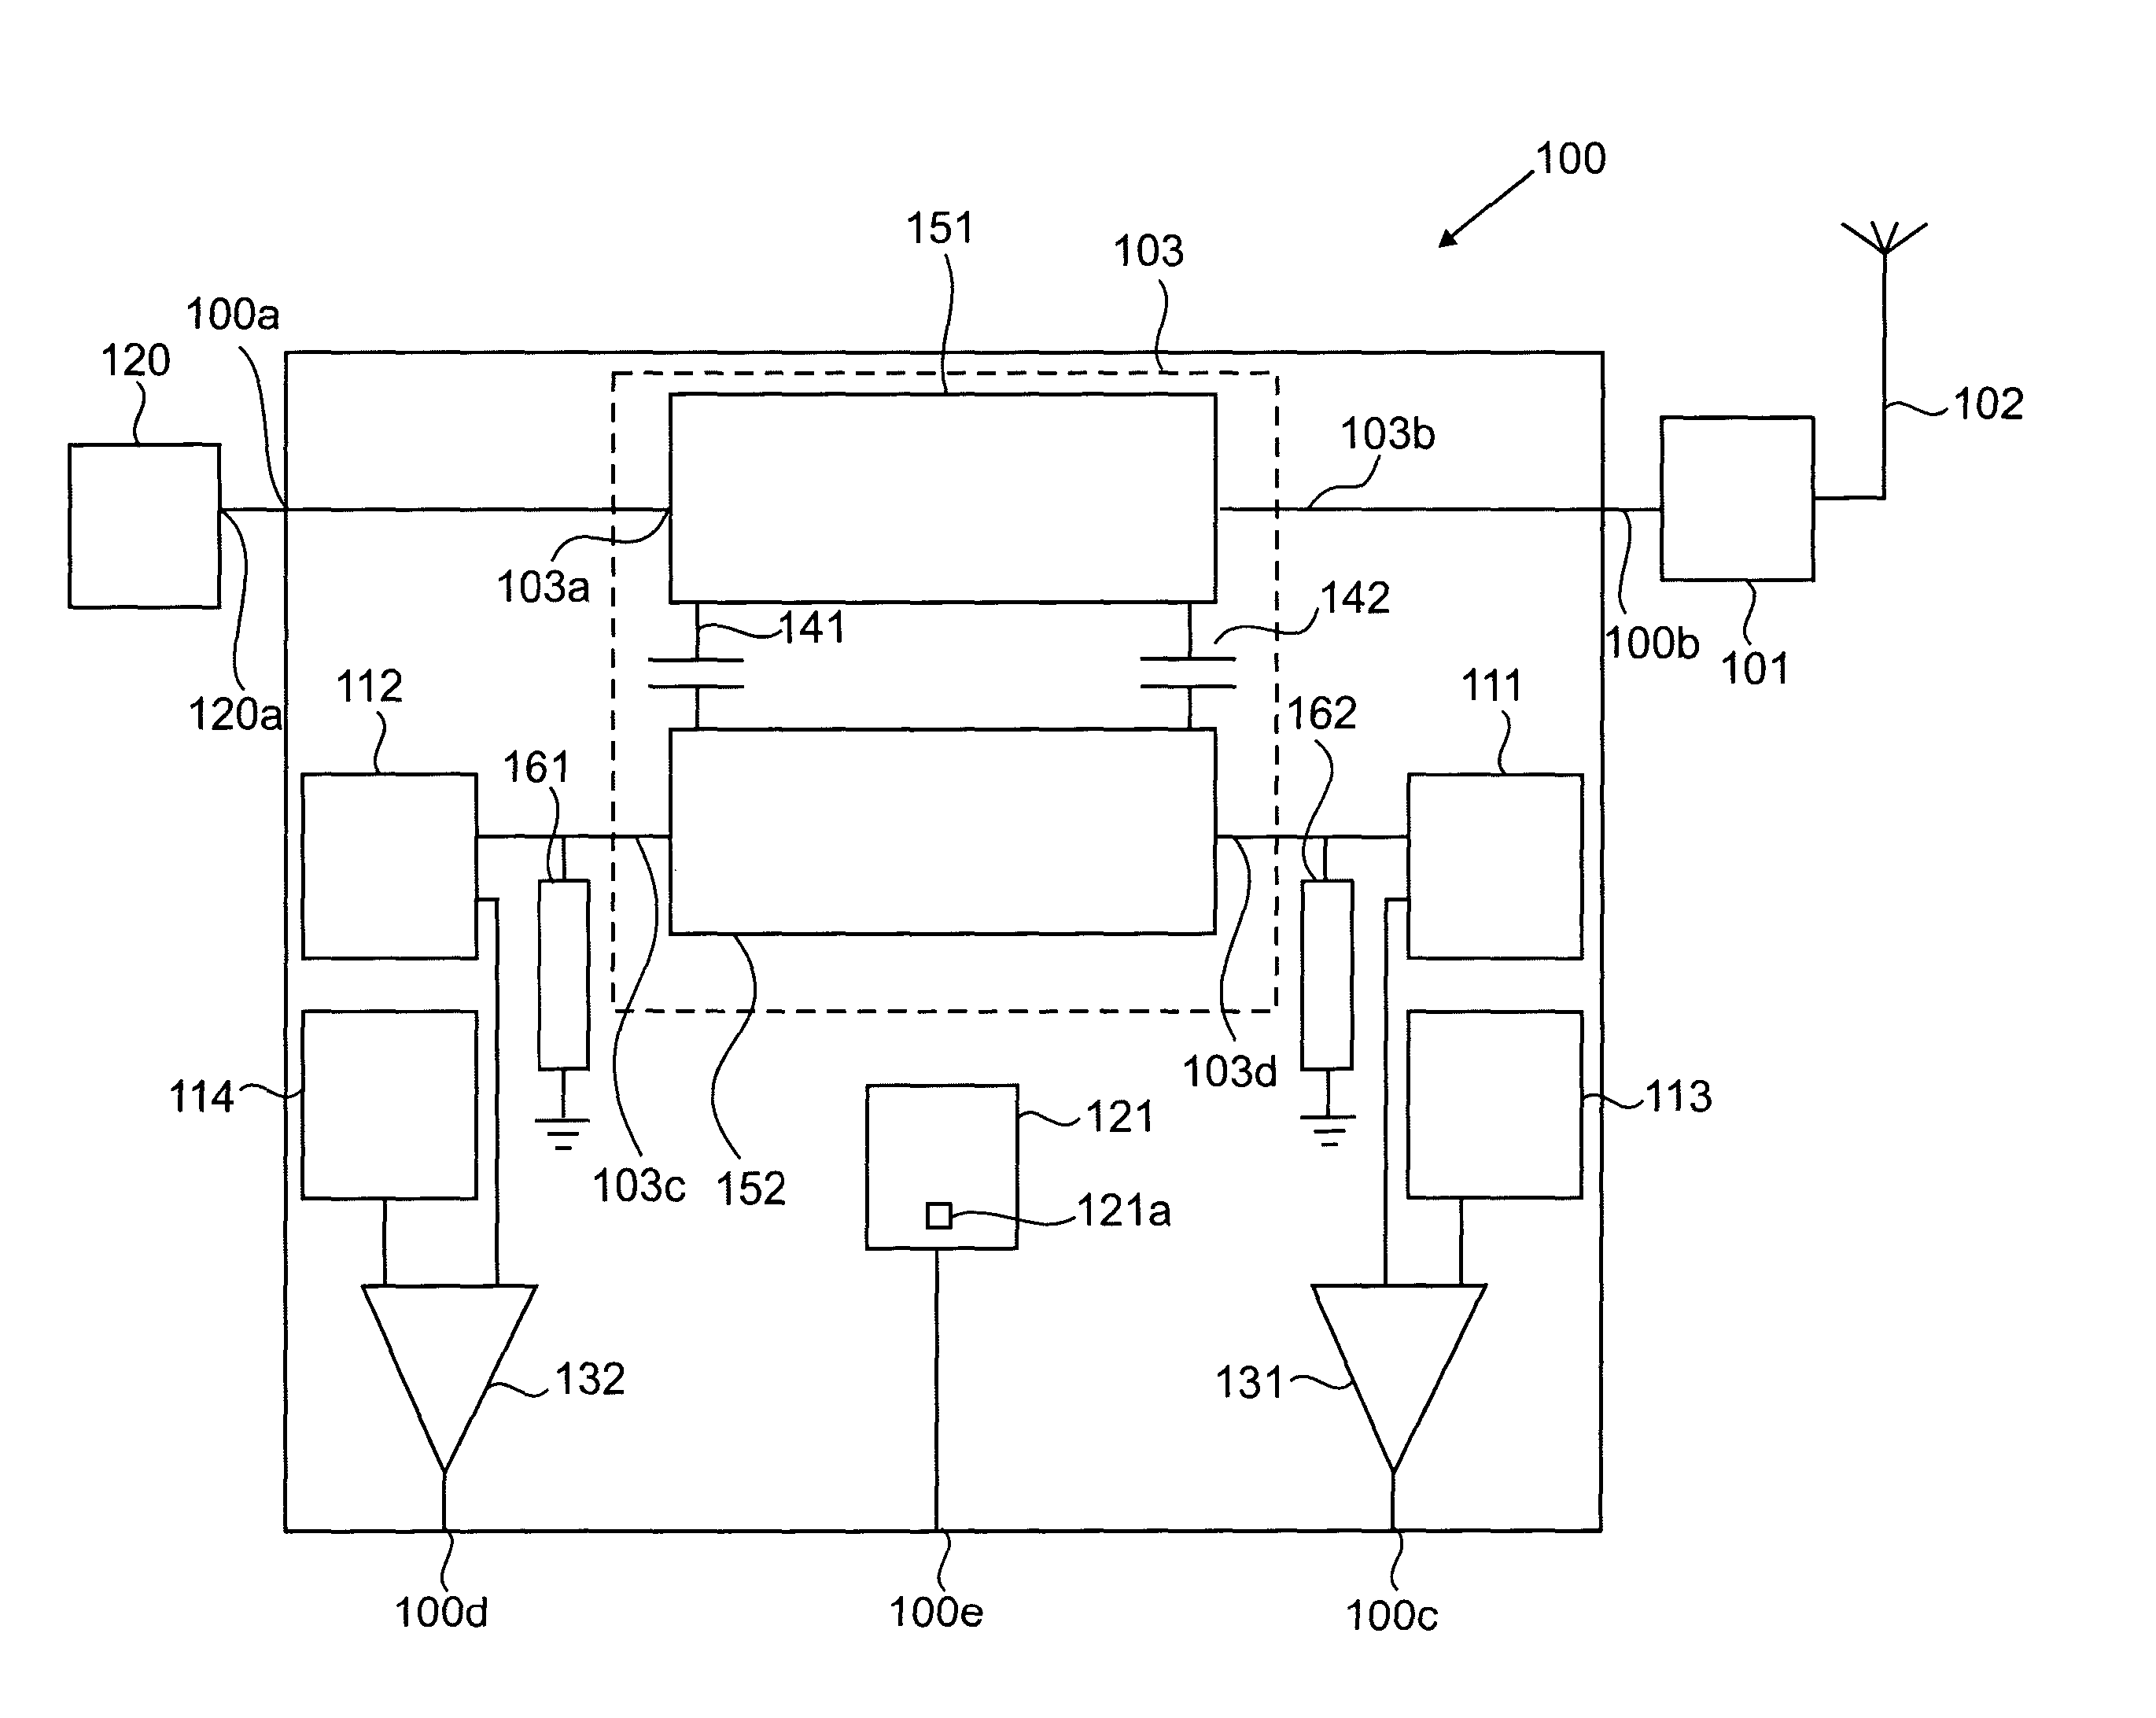 Power transfer measurement circuit for wireless systems